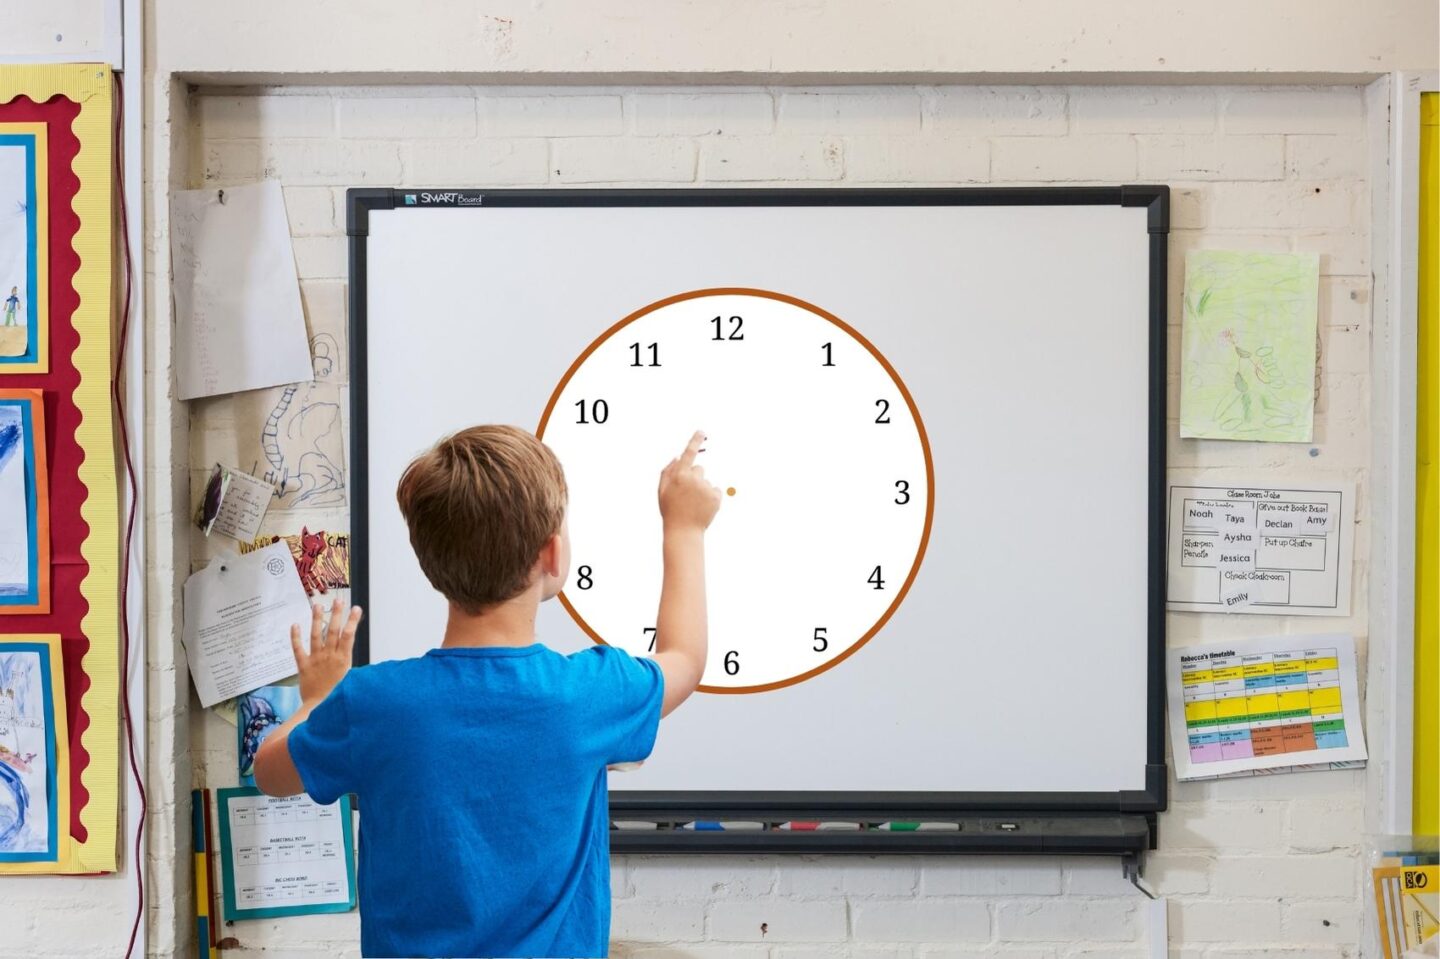 The image shows a whiteboard placed on a classroom wall. The wall is made of white cinder blocks. There are papers taped on the wall to the right and left of the whiteboard. There is a bulletin board to the left of the whiteboard. A boy wearing a blue shirt holds his finger in the air in front of a large clock shown on the whiteboard. There are numbers on the clock but no hands.